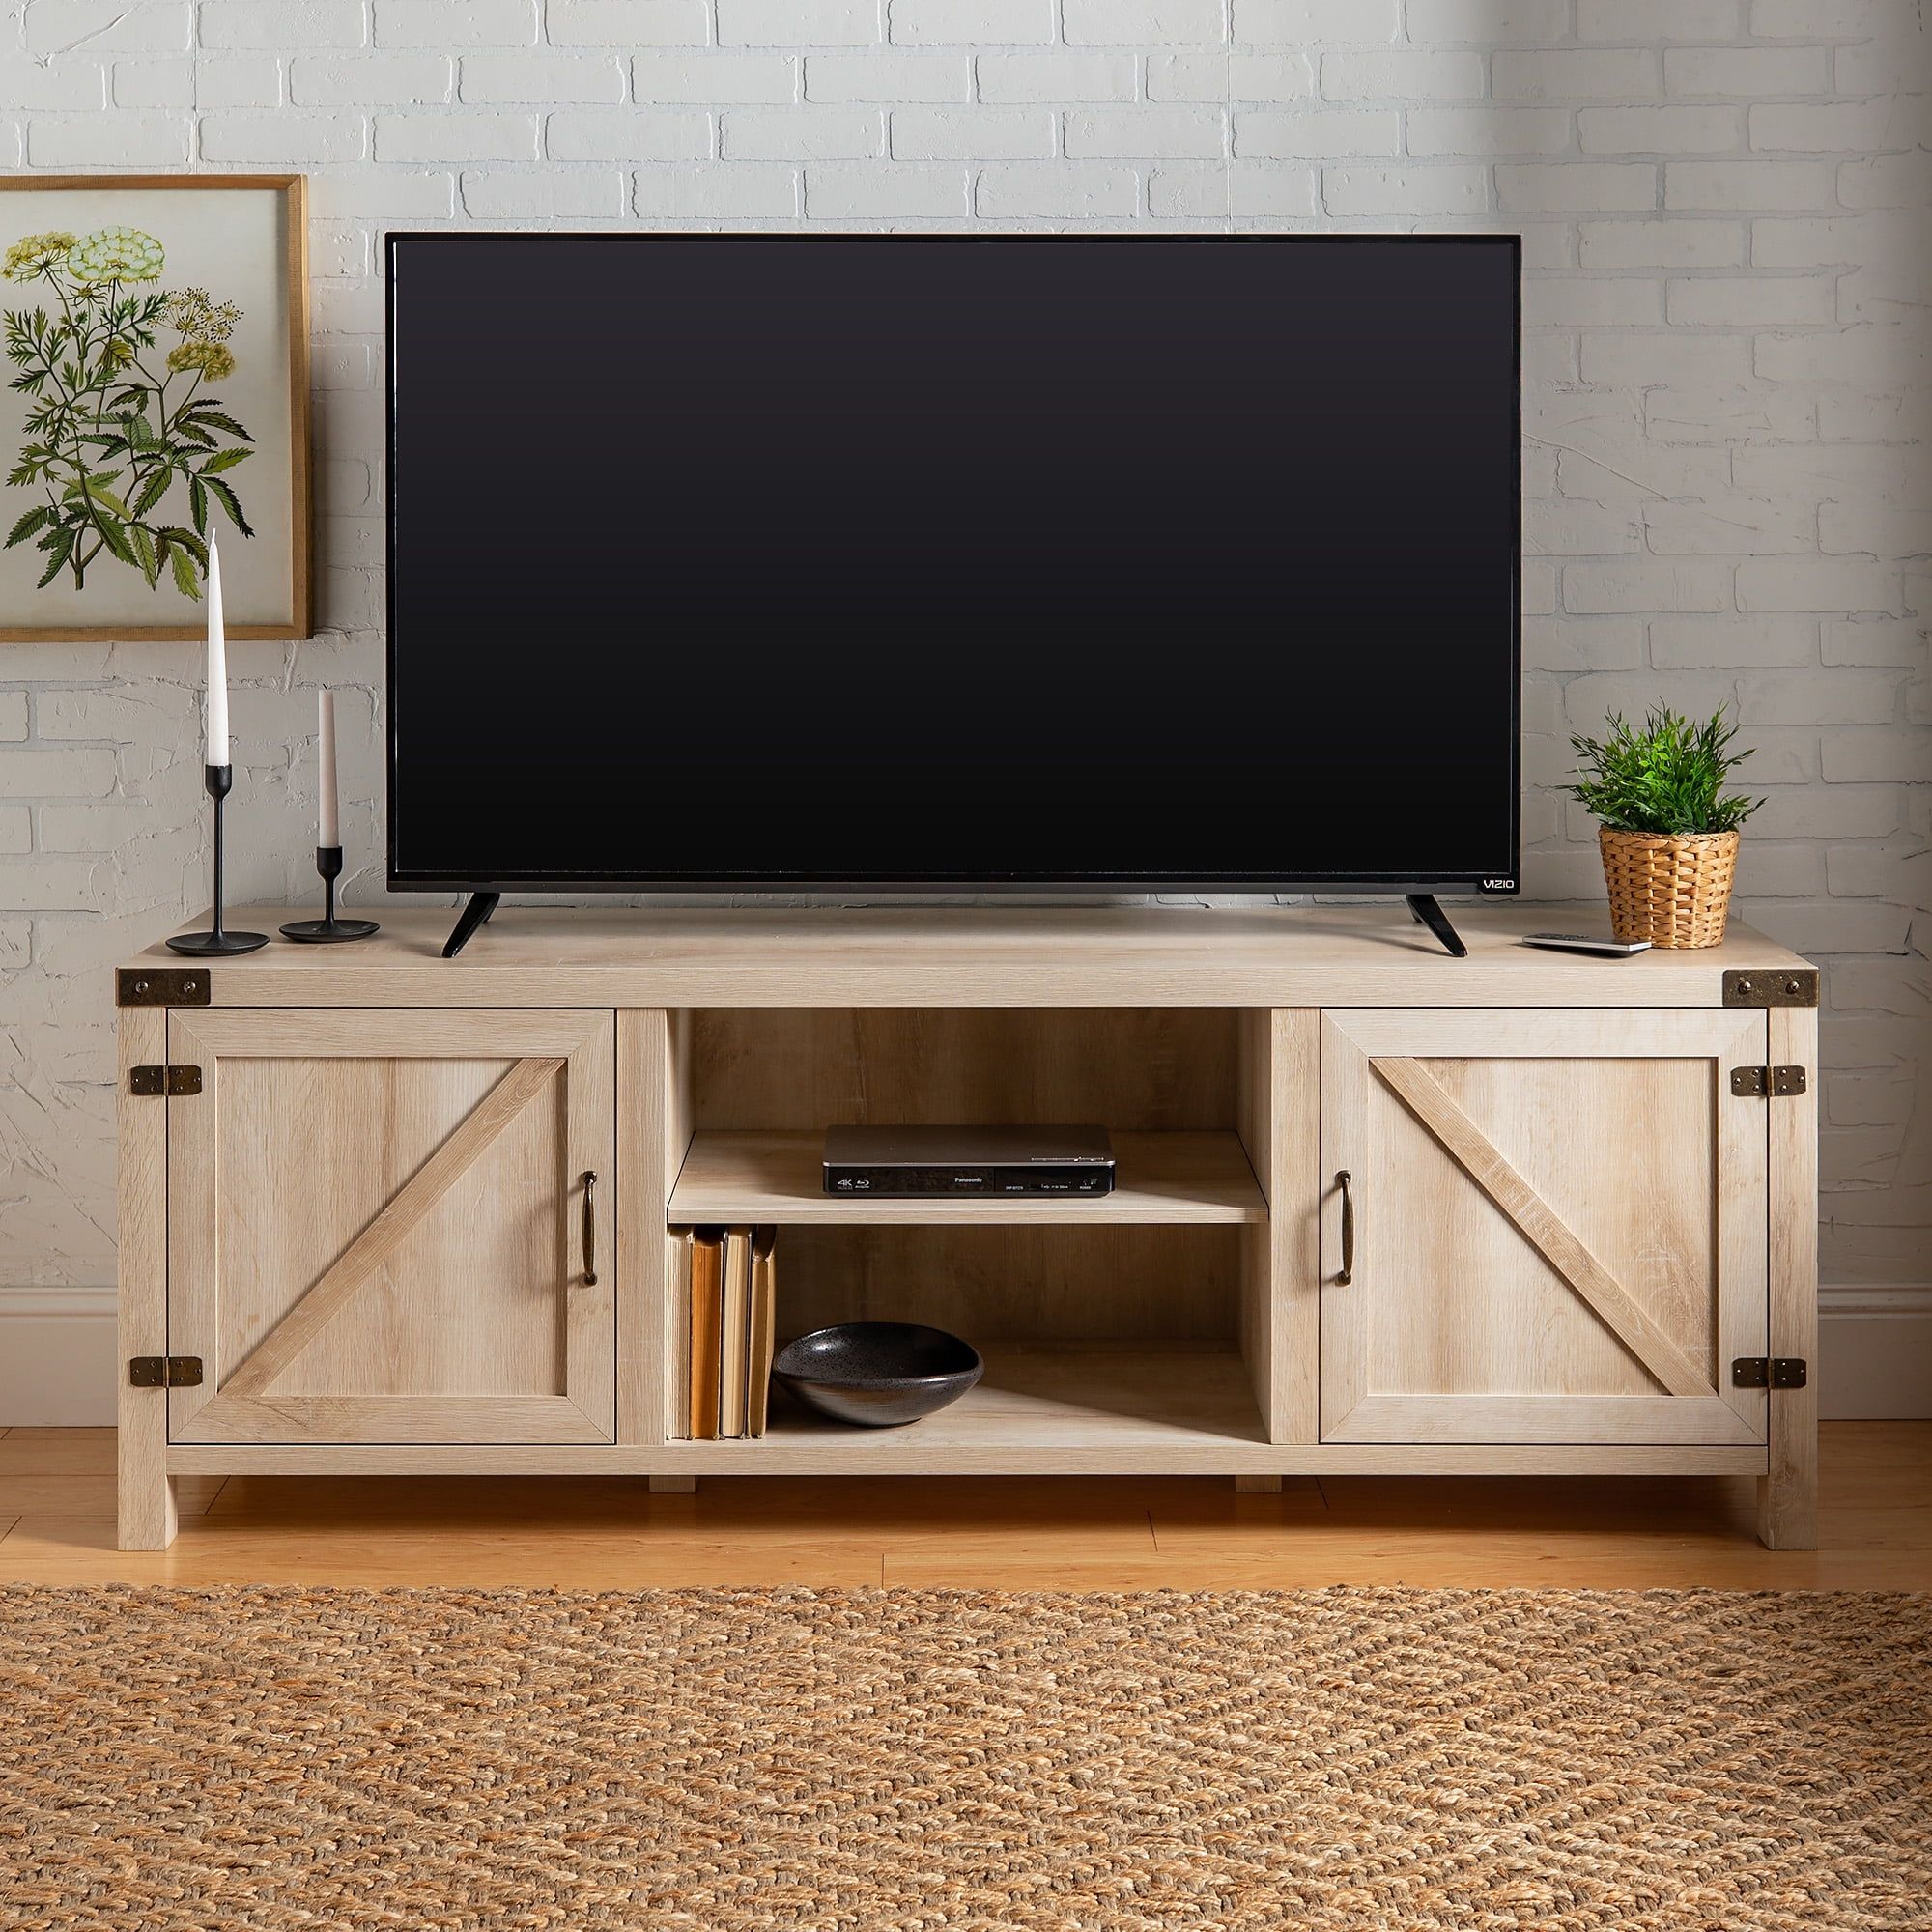 Woven Paths Farmhouse Barn Door Tv Stand For Tvs Up To 80", White Oak Intended For Farmhouse Tv Stands (View 2 of 20)